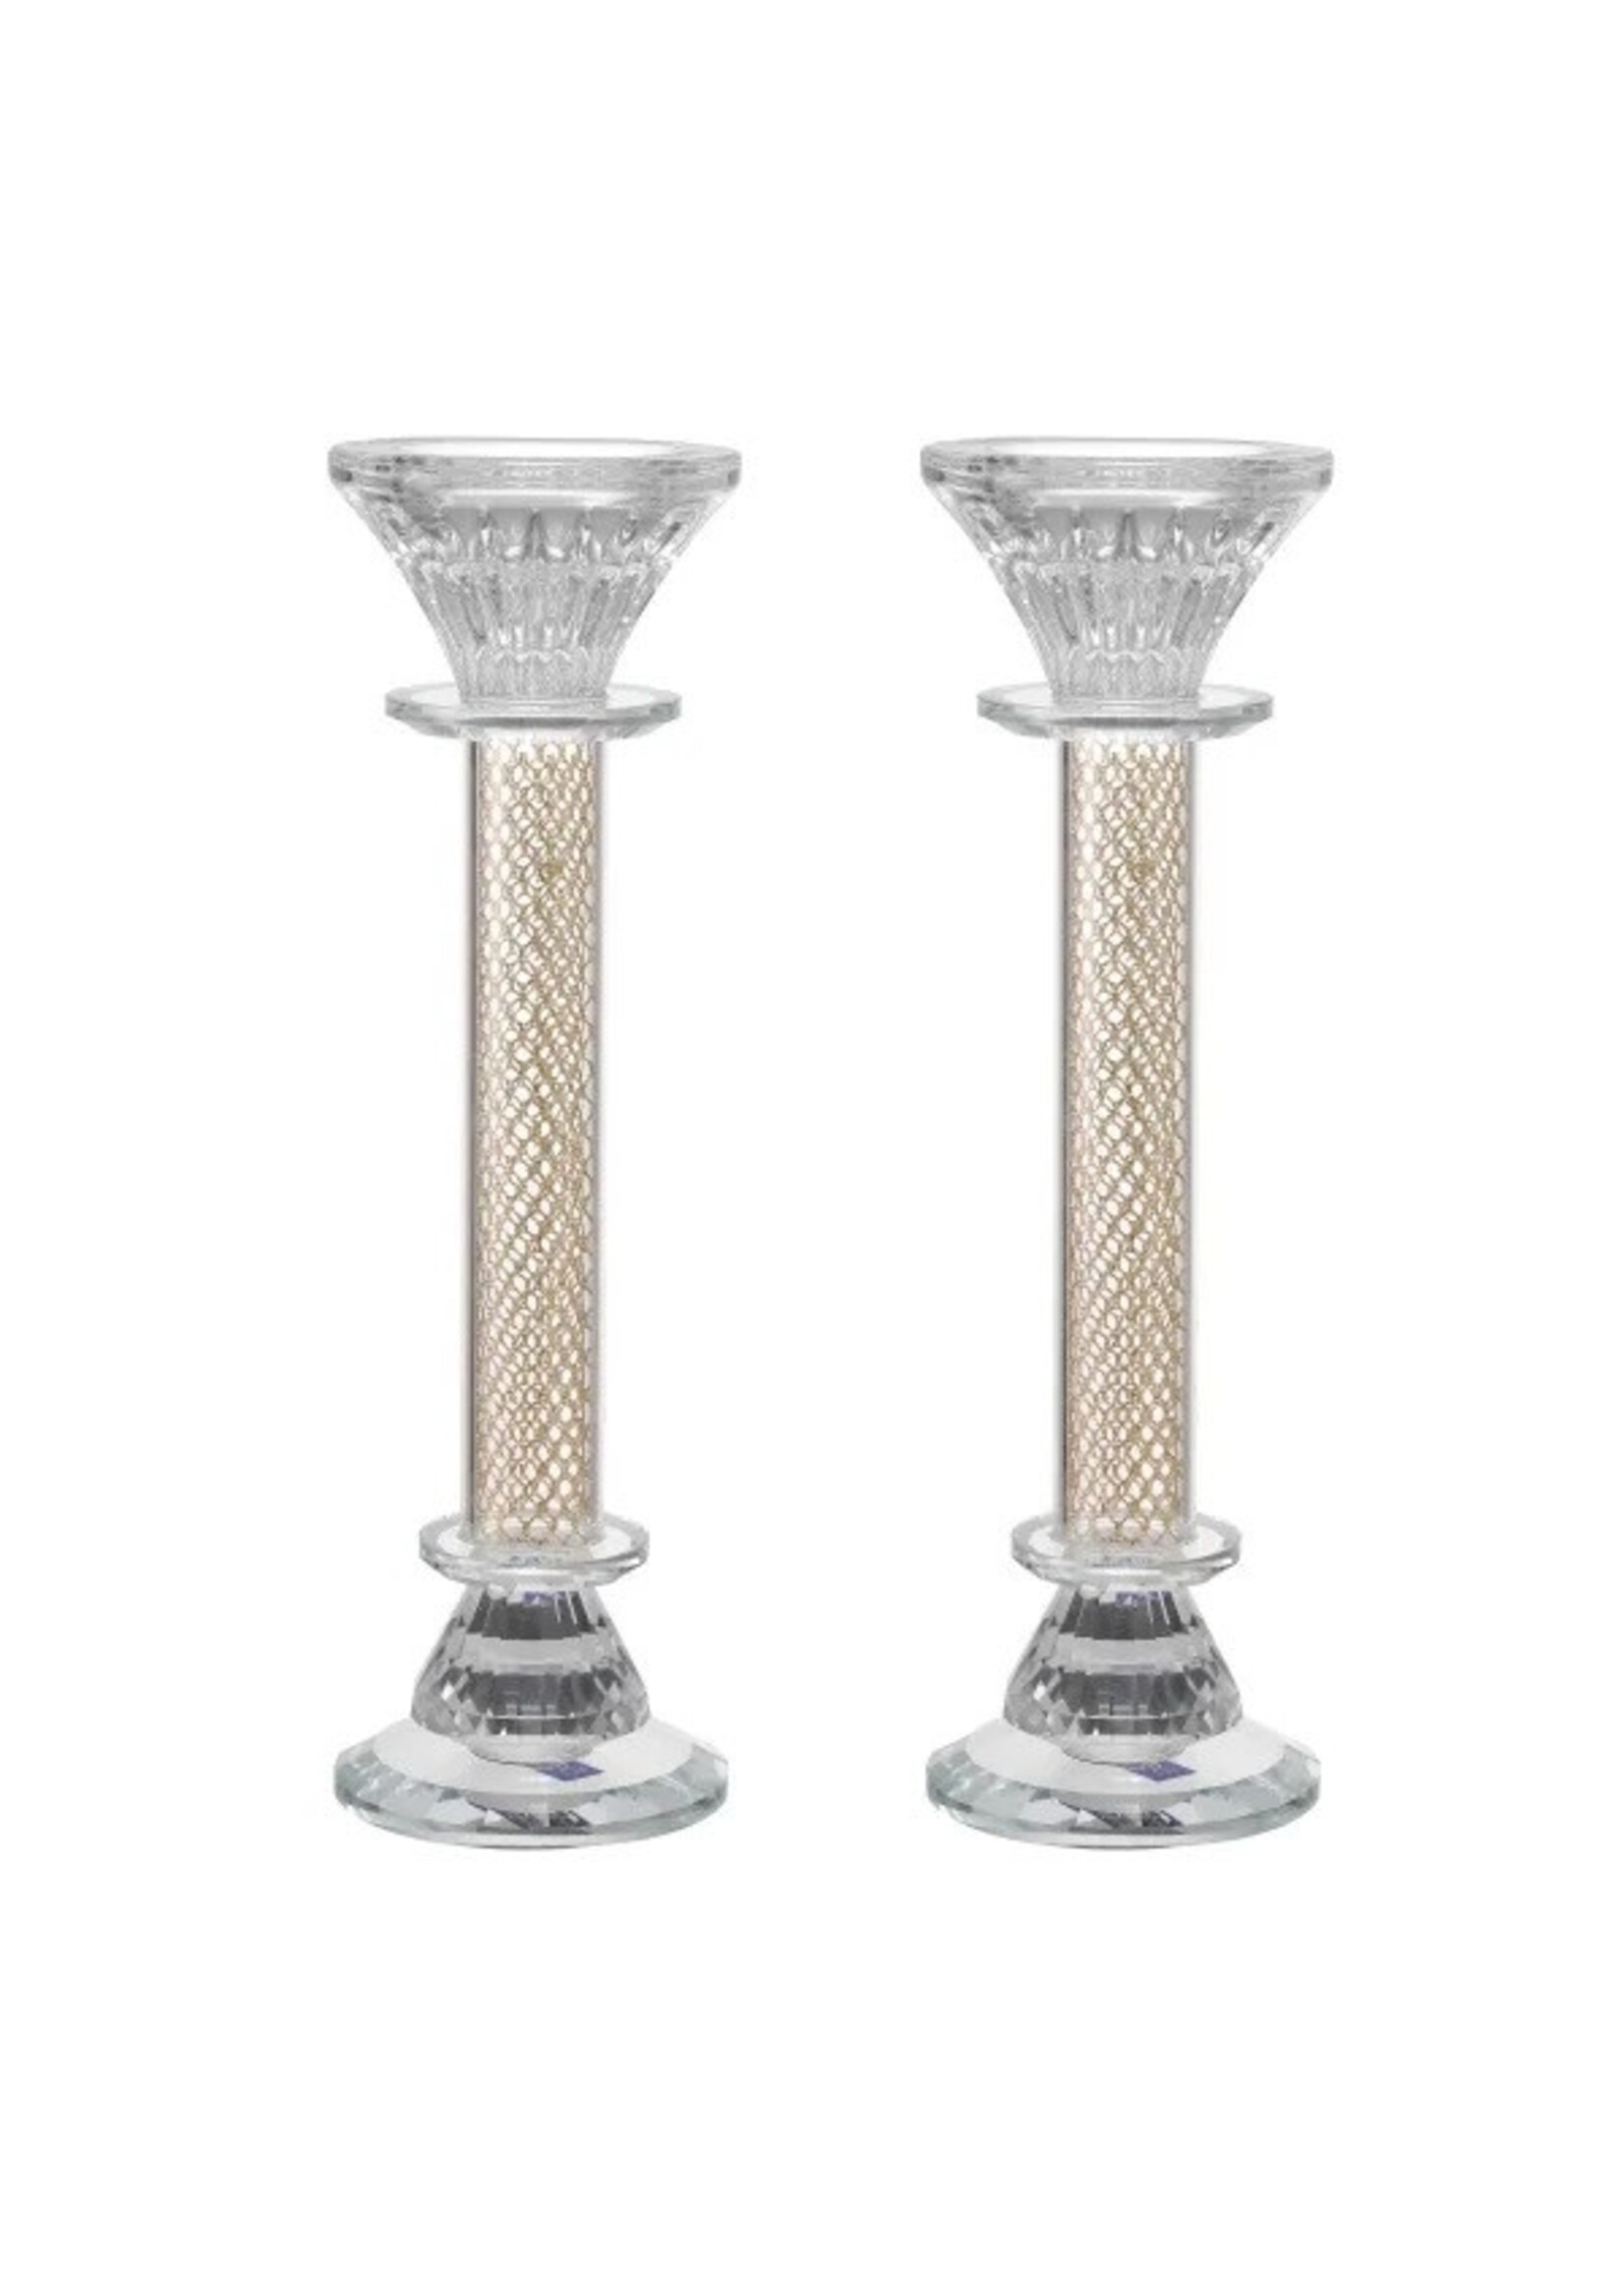 CANDLE HOLDERS CRYSTAL WITH GOLD NET - 9.5IN